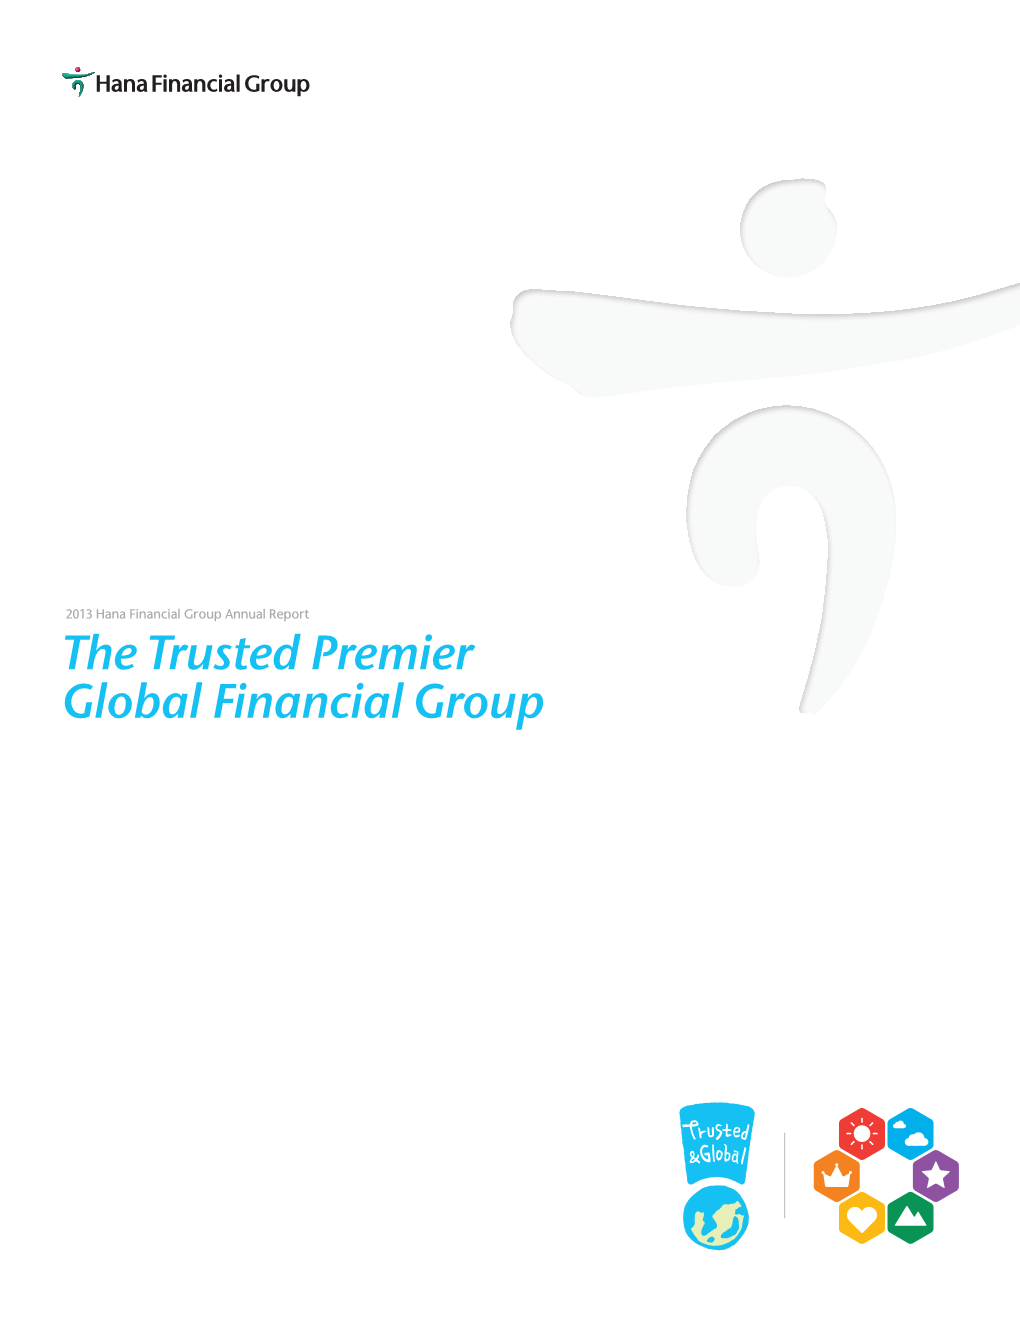 The Trusted Premier Global Financial Group